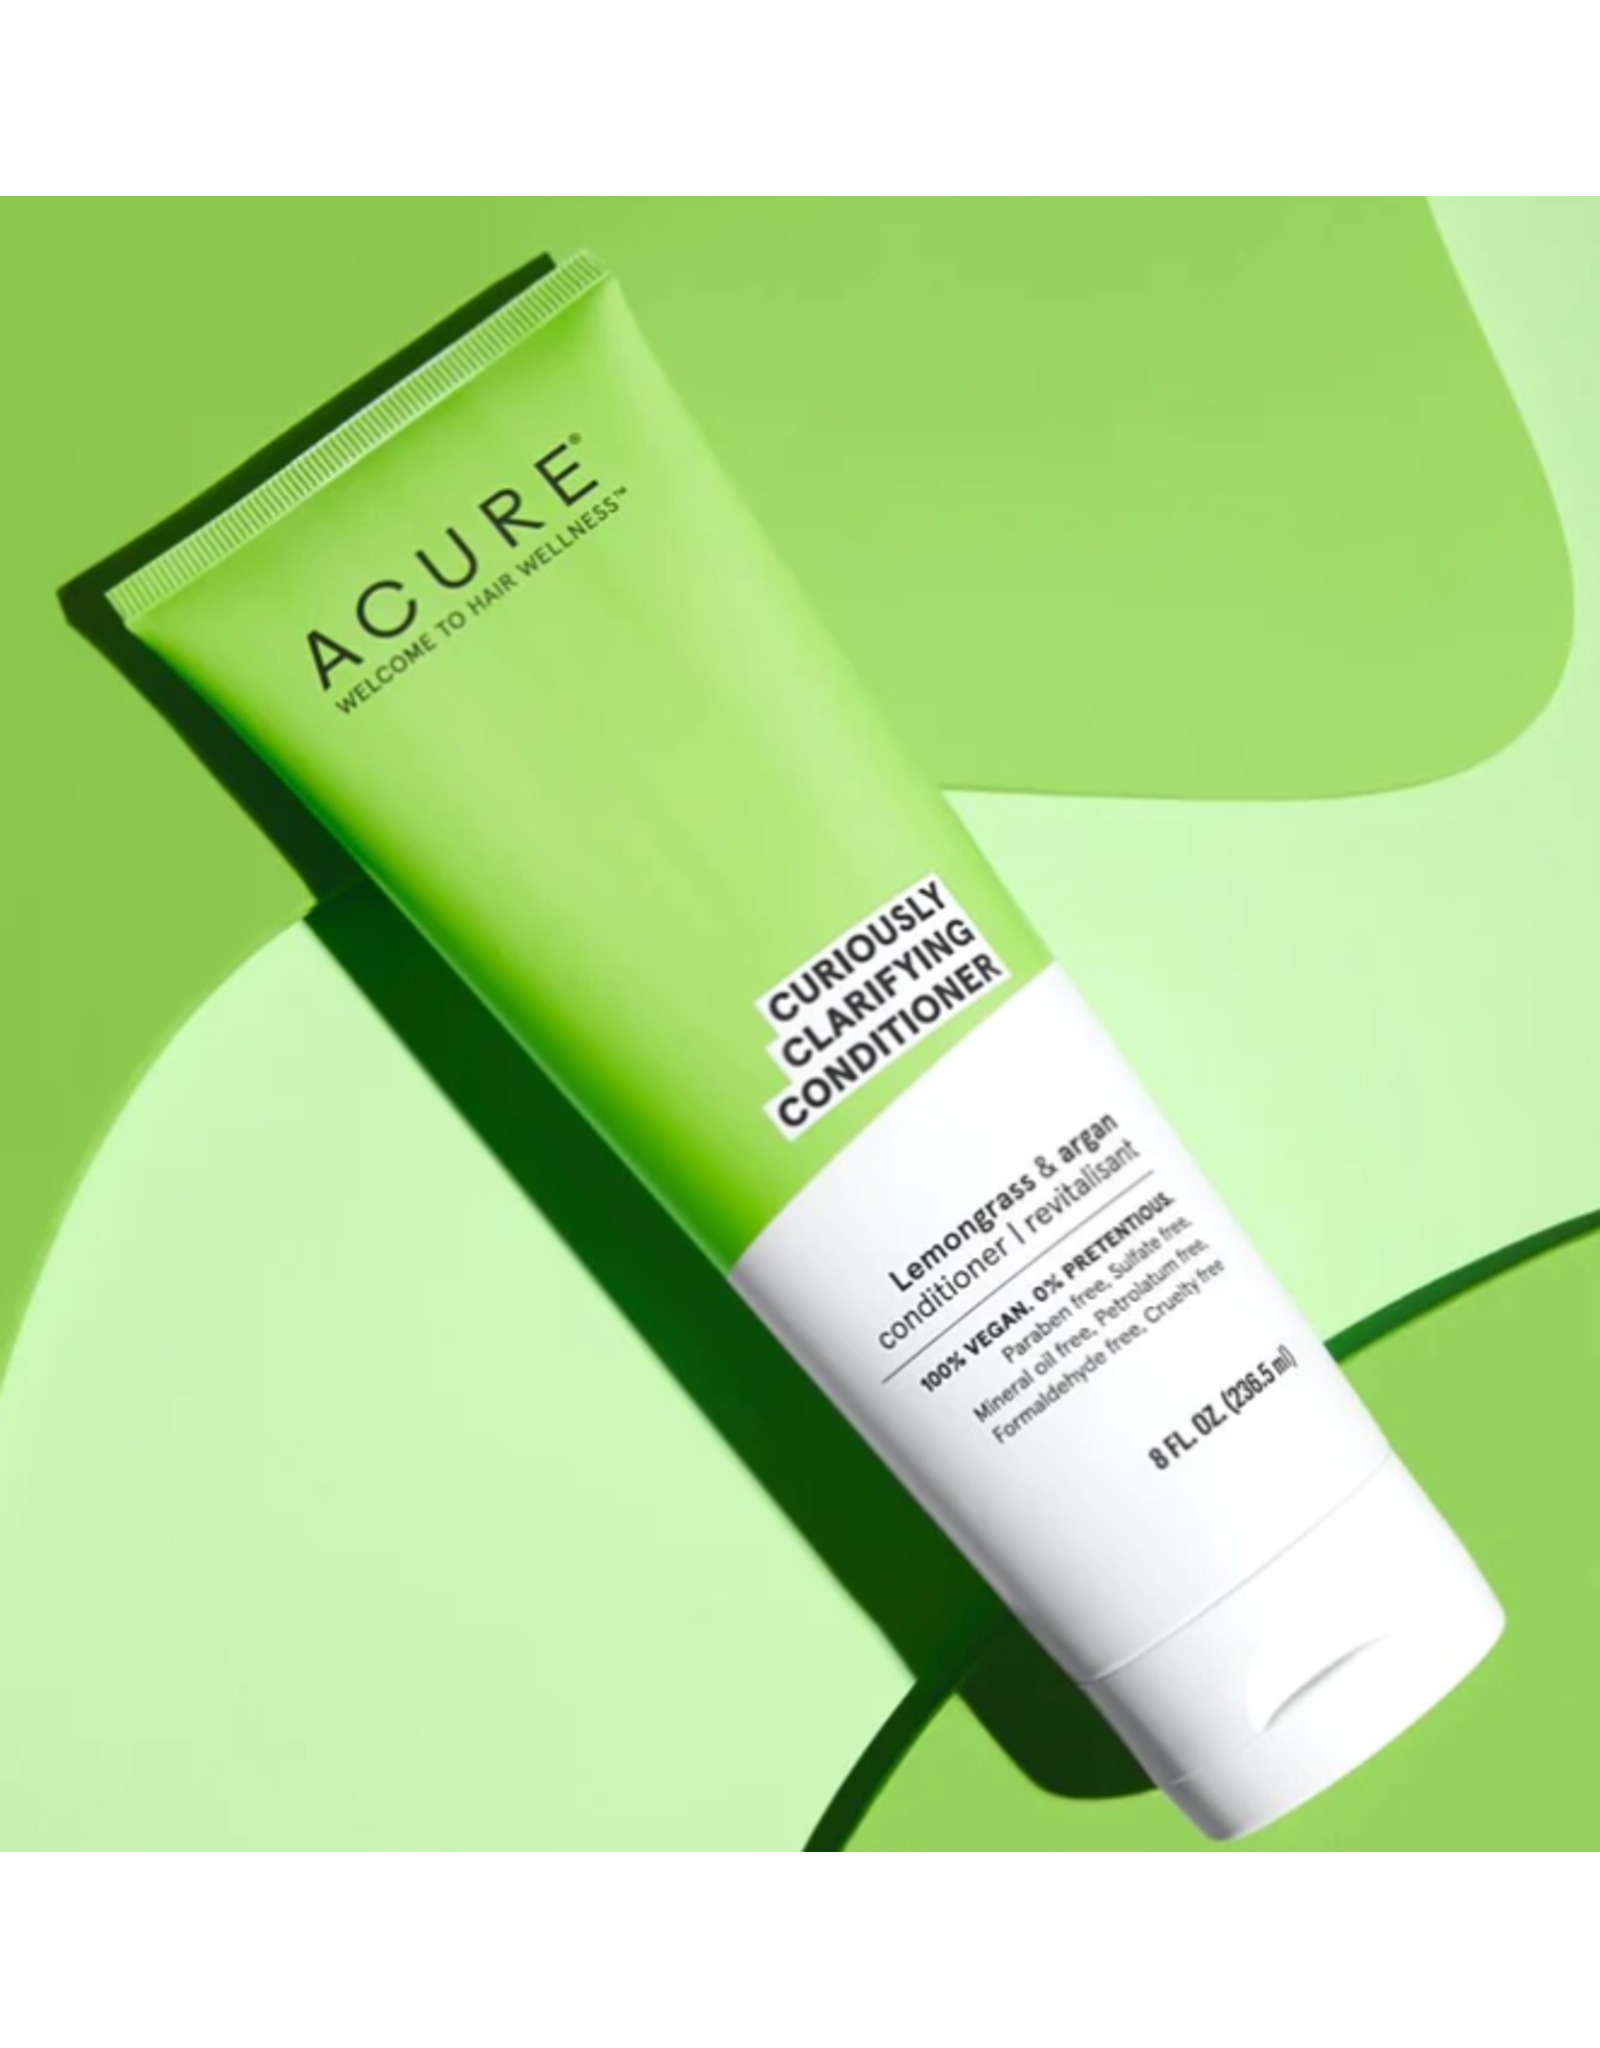 Acure Curiously Clarifying Conditioner - Lemongrass 236.5ml